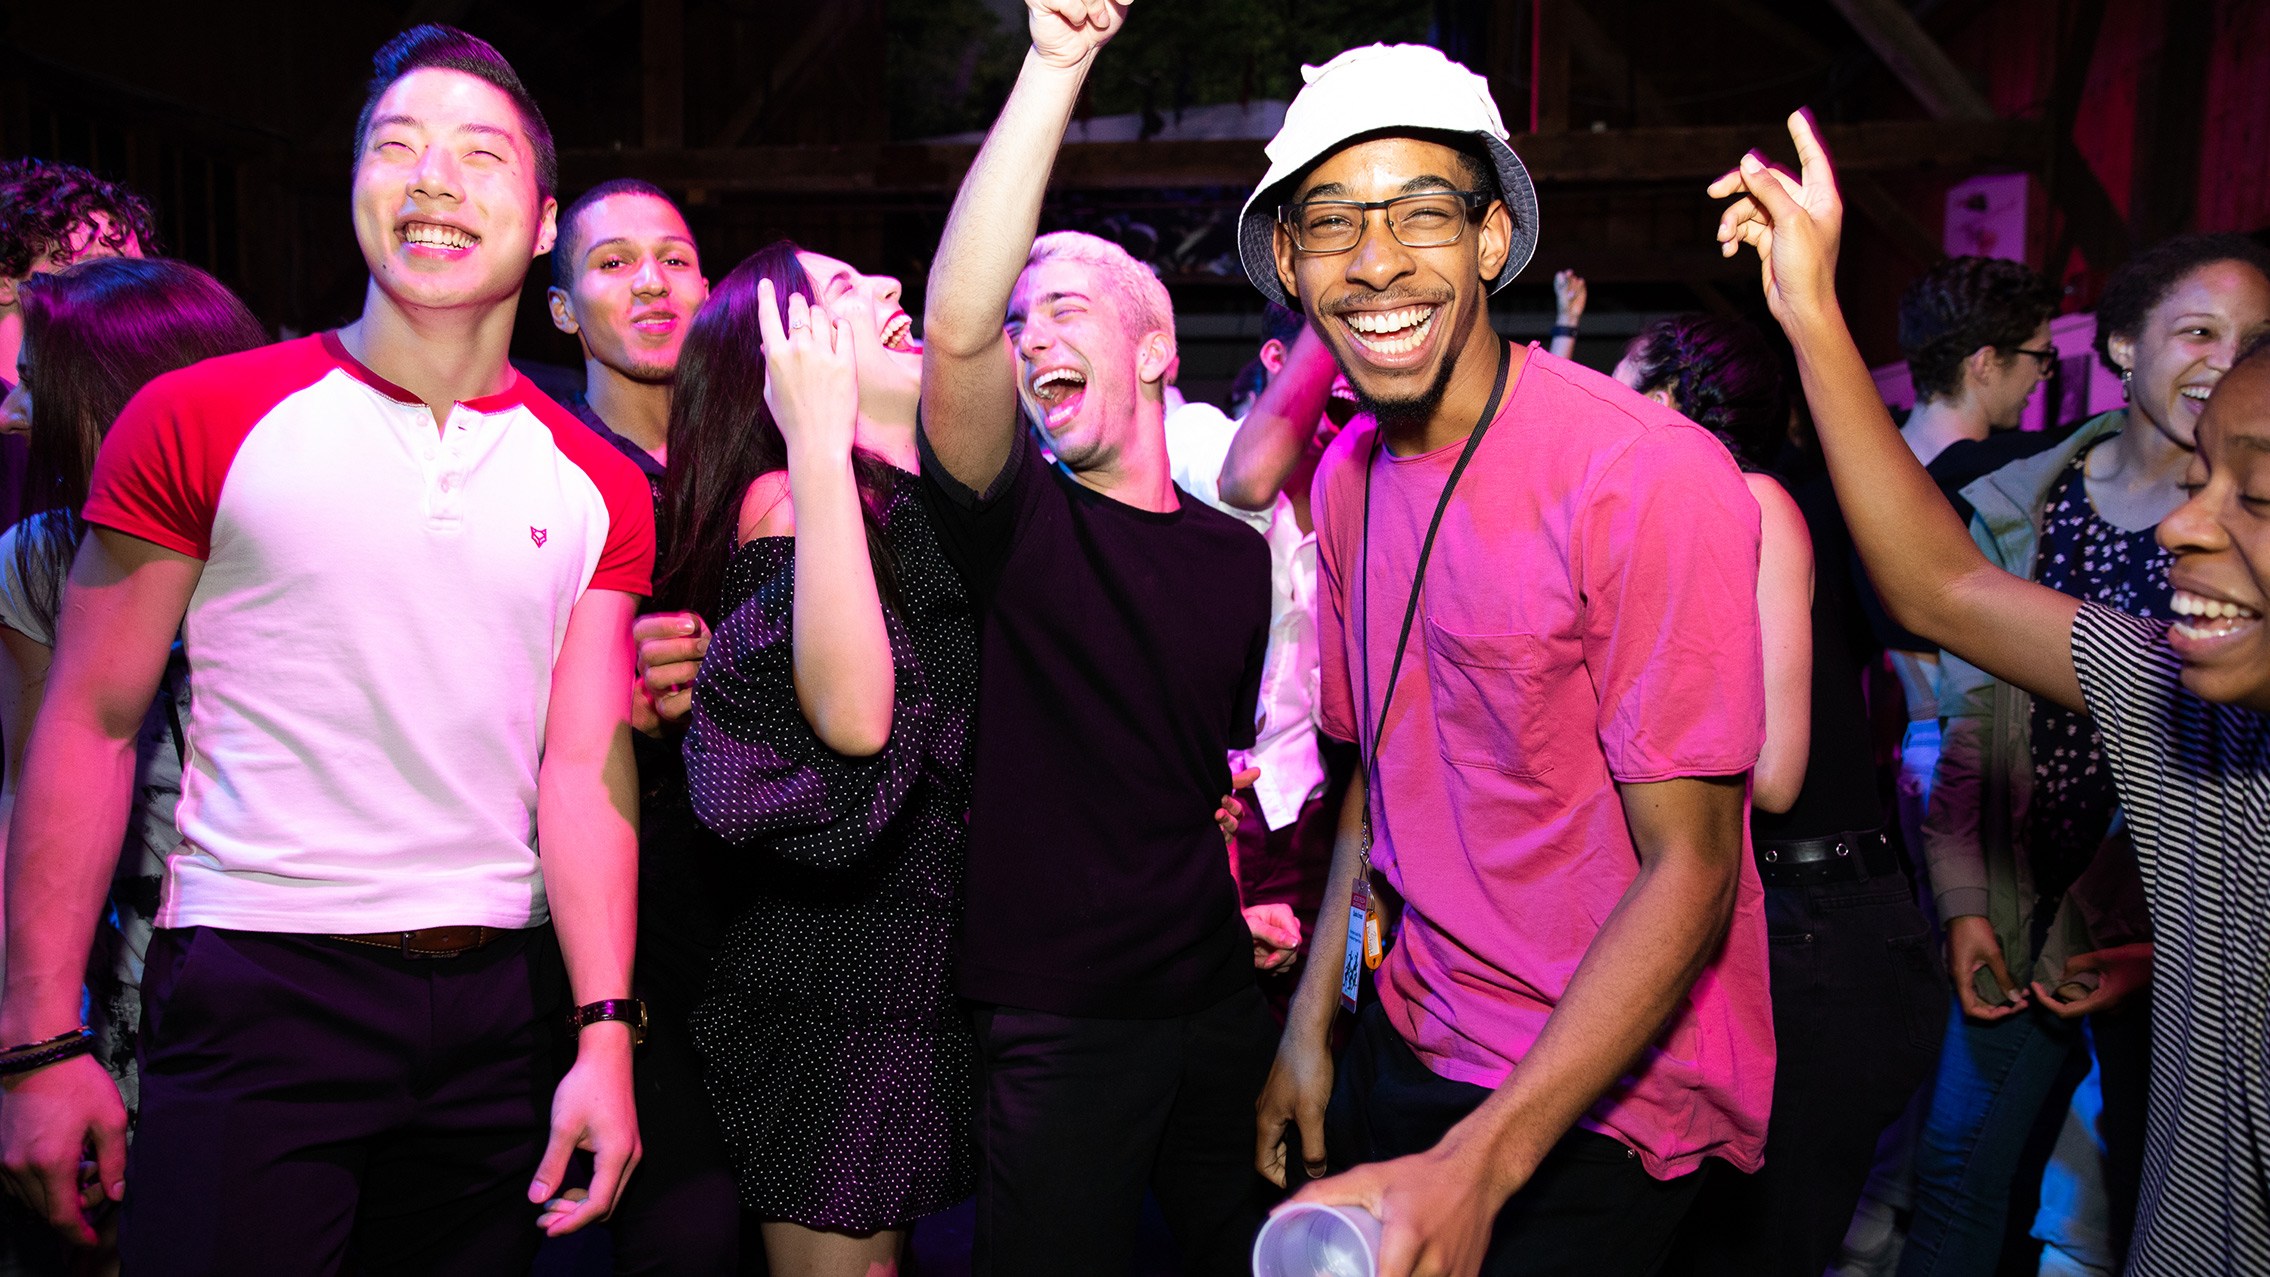 A group of people are smiling with their arms up under pink lighting.